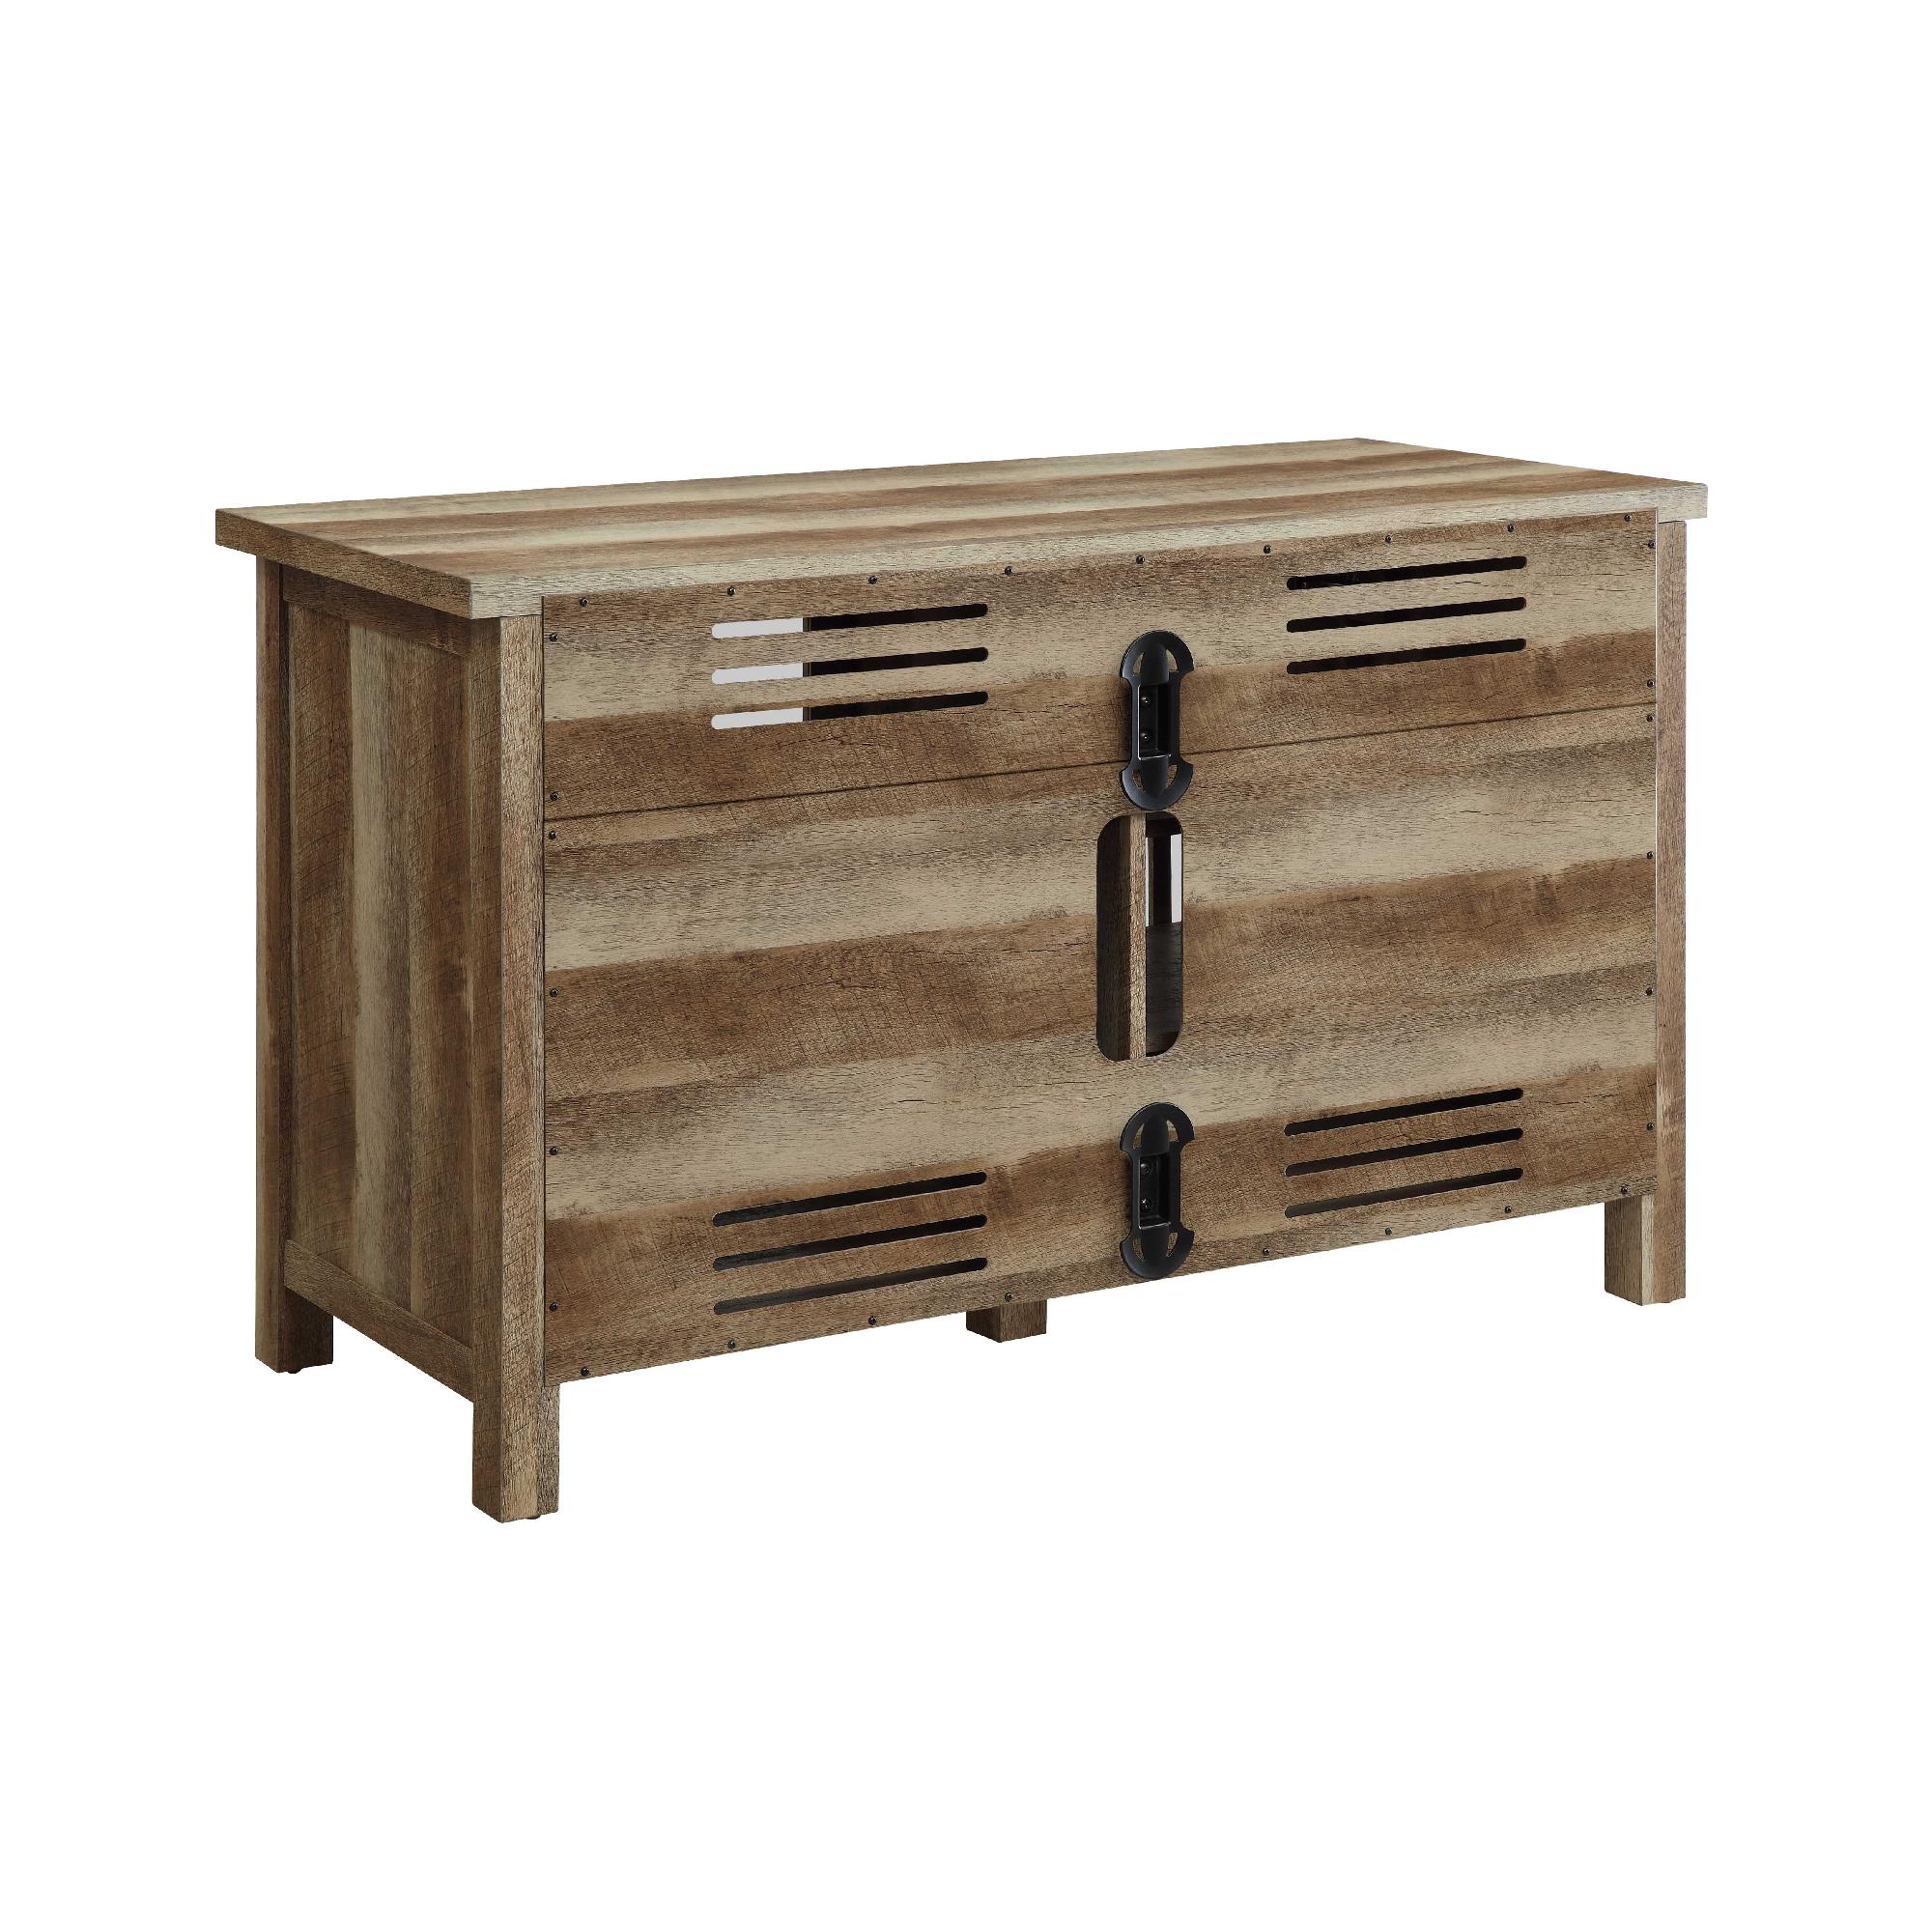 Better Homes & Gardens Oxford Square TV Stand for TVs up to 55", Rustic Brown - image 5 of 12